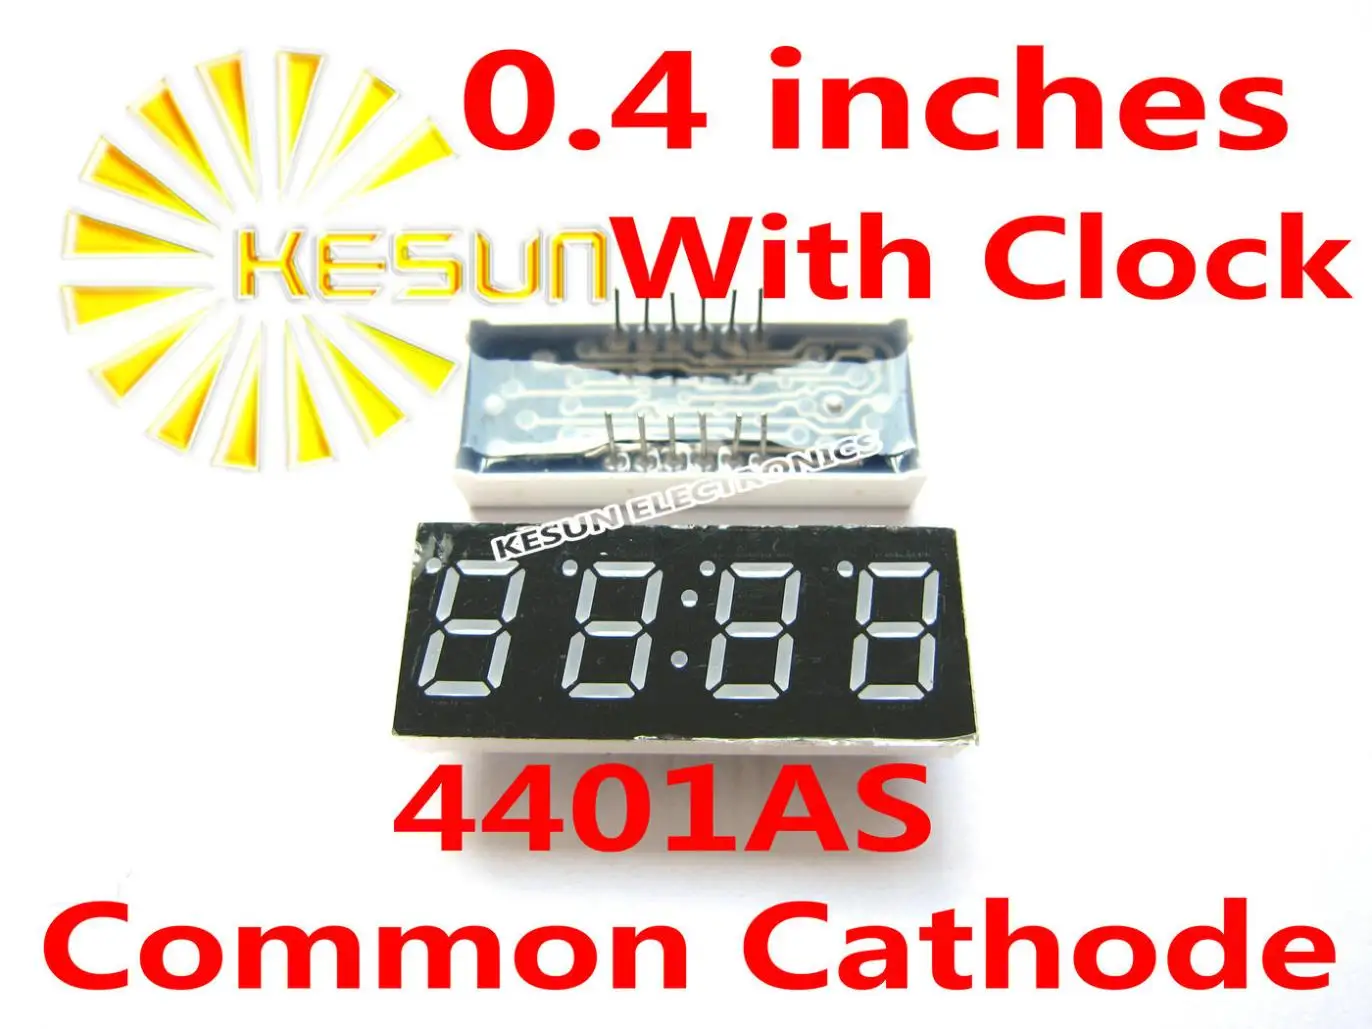 Фото 5PCS x 0.4 inches Red Common Cathode/Anode 4 Digital Tube With Clock LED Display Module 4401AS 4401BS | Электронные компоненты